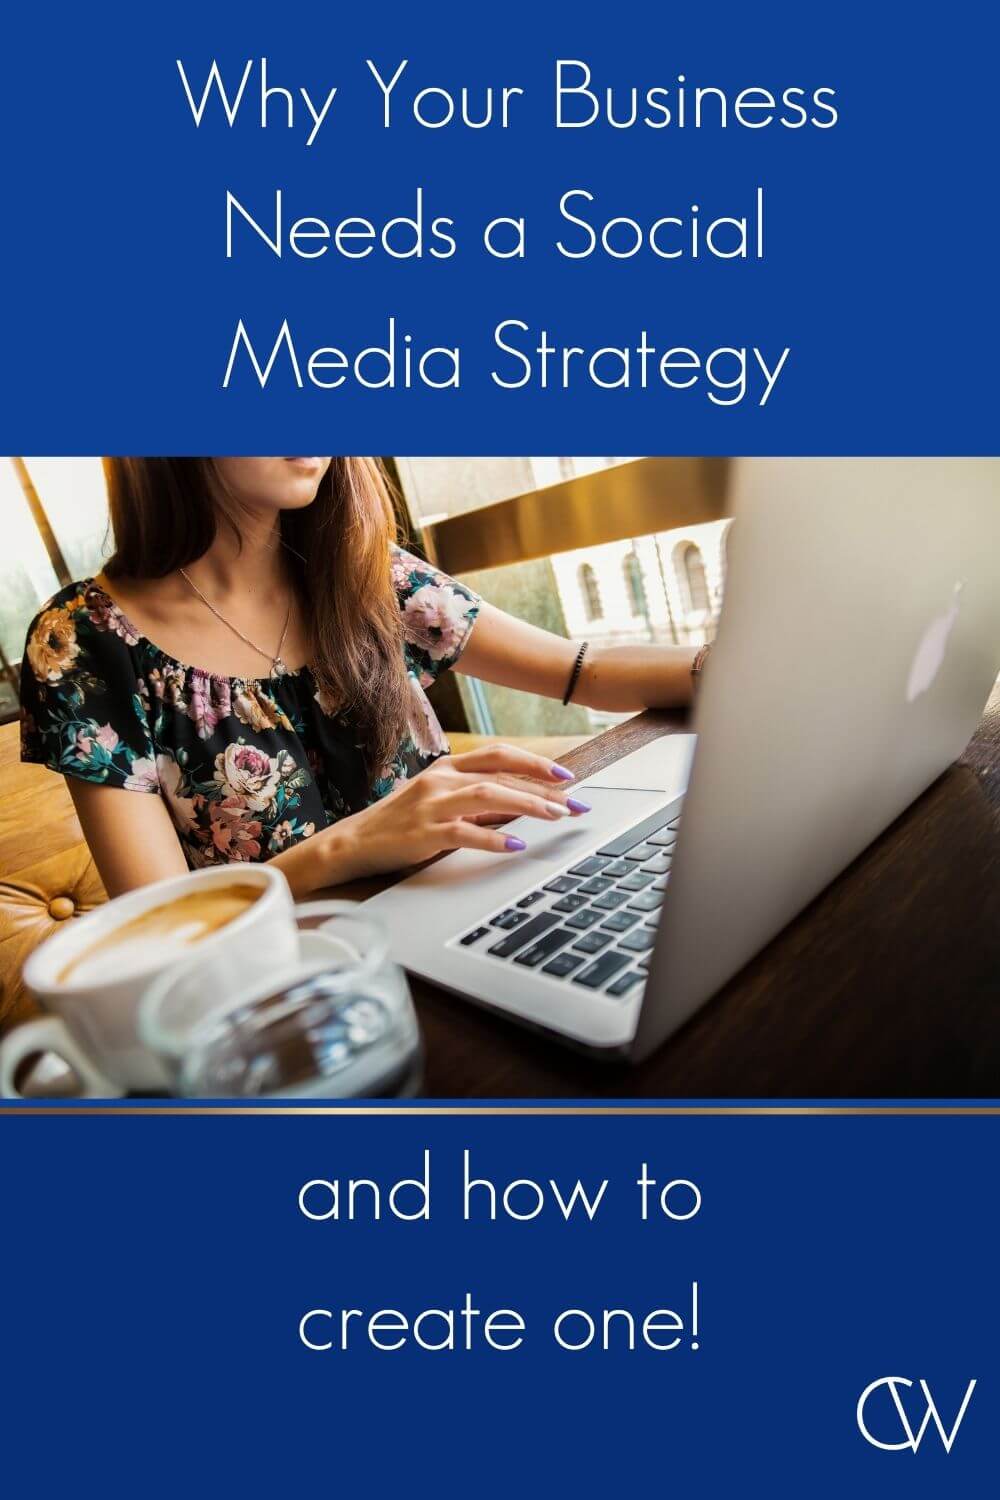 Why Your Business Needs a Social Media Strategy